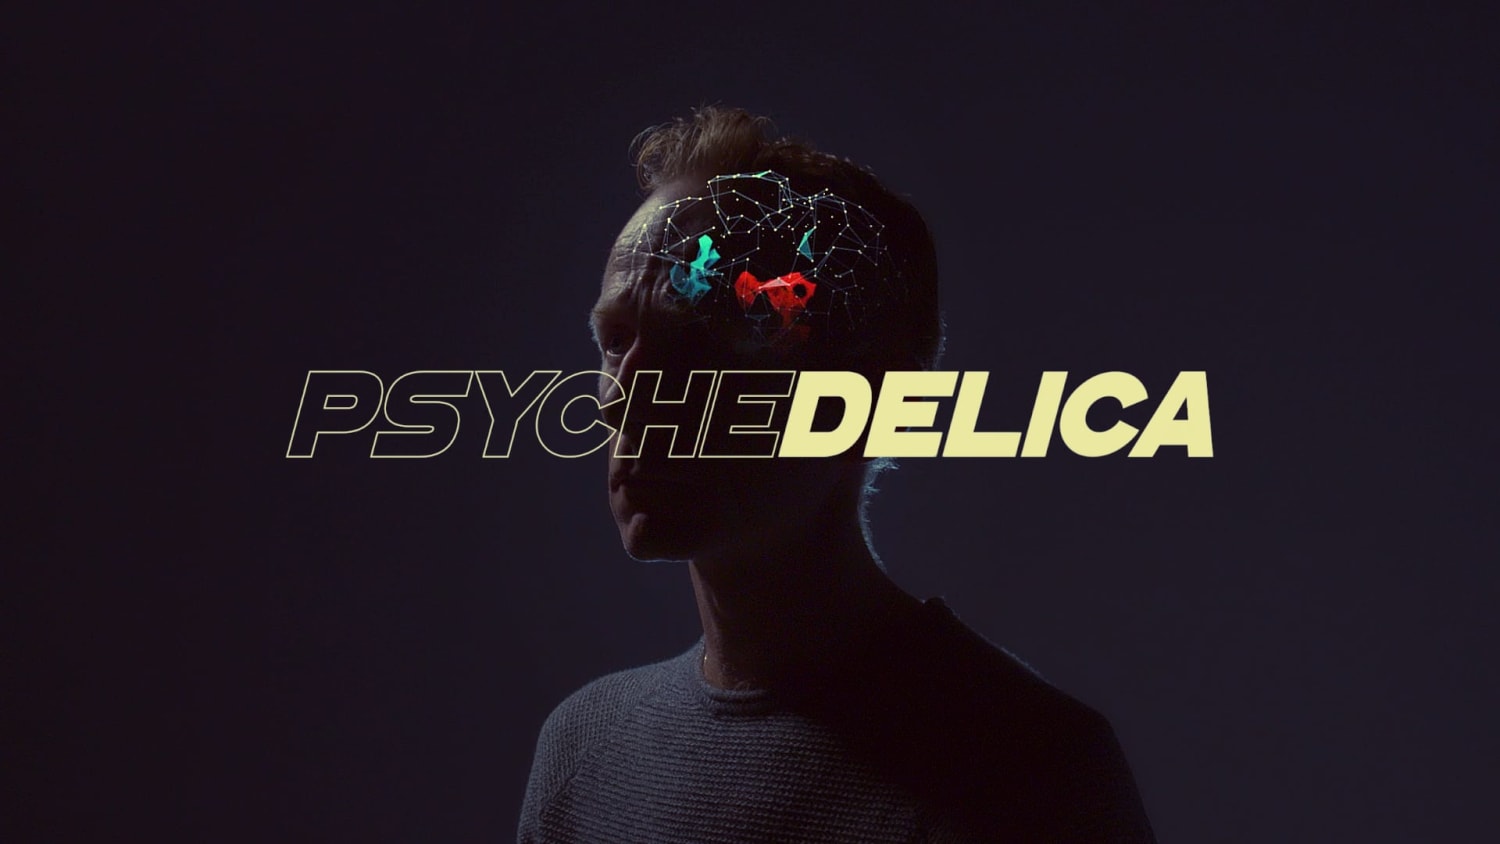 Psychedelica (2020) - Psychedelica is a journey into the world of psychedelic medicine, which could revolutionise how we treat depression, obsessive compulsive disorder, and addiction.